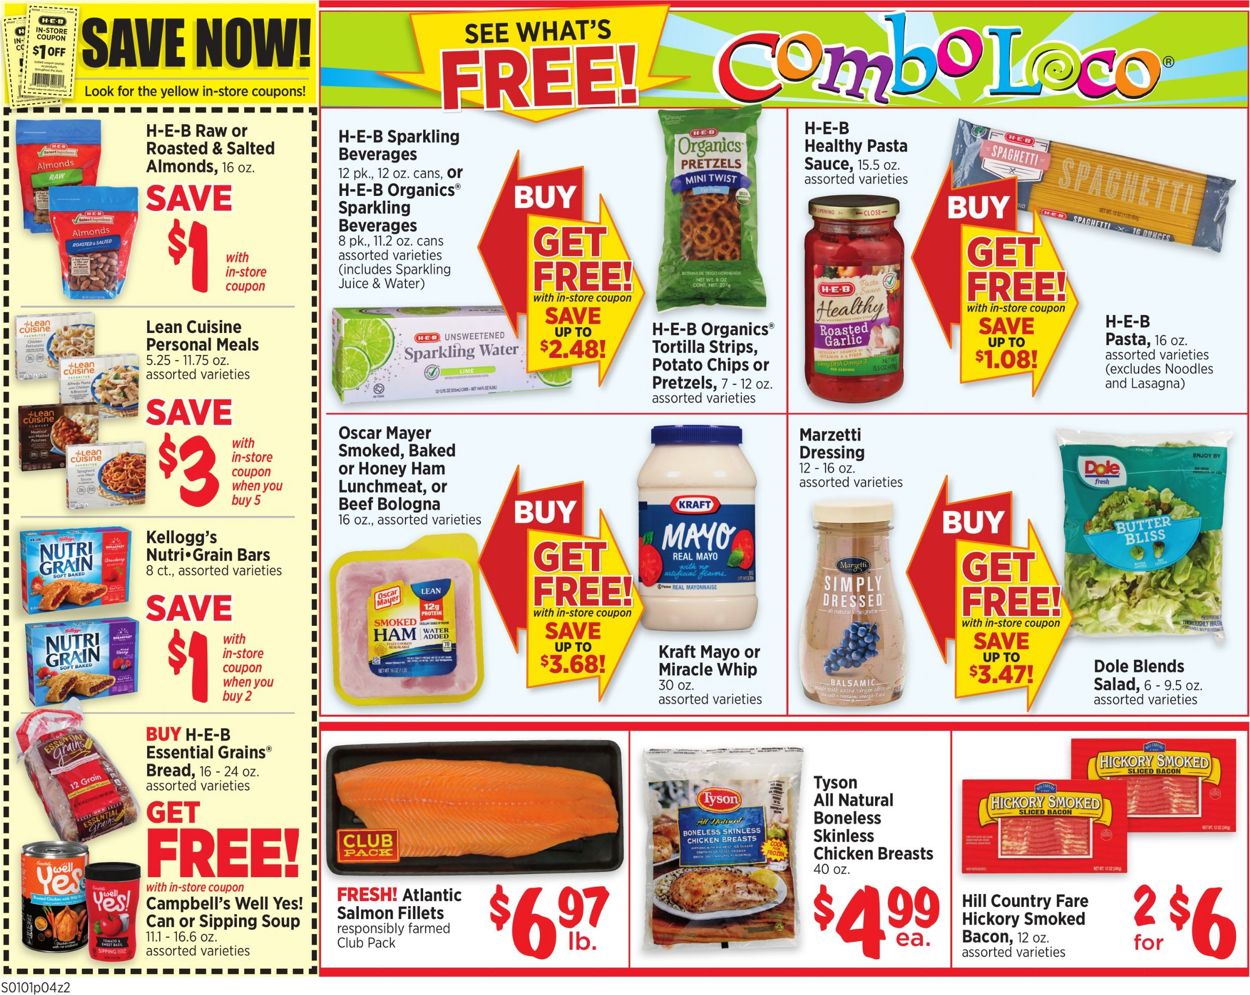 Catalogue H-E-B from 01/01/2020